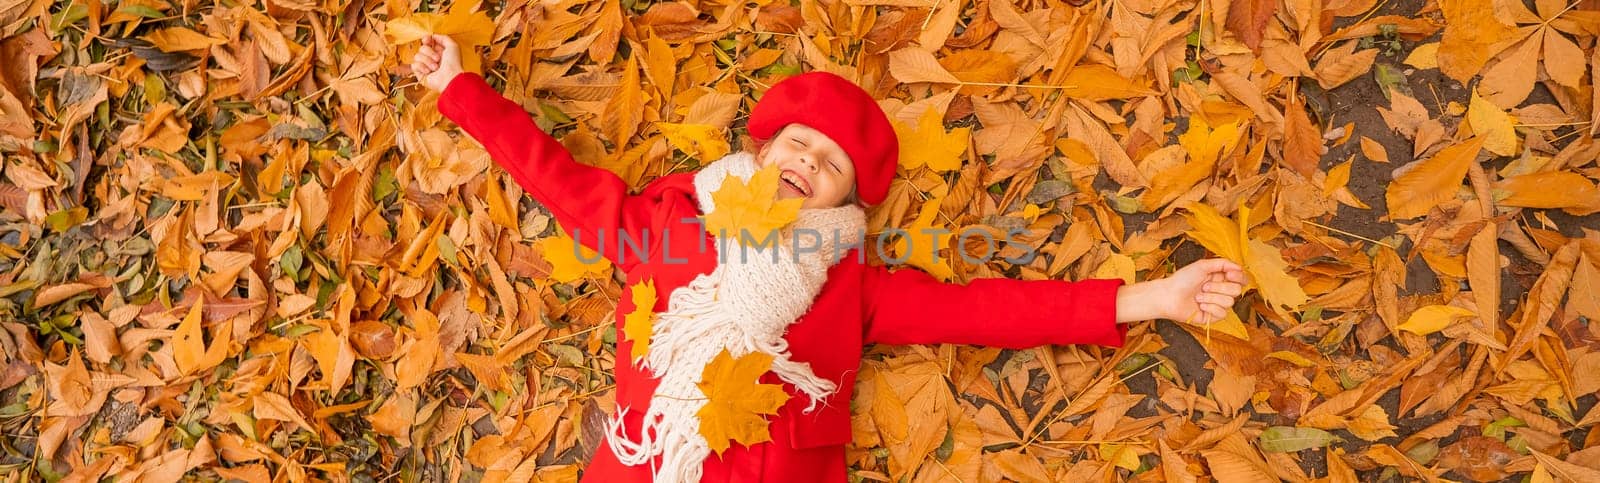 An overhead view of a caucasian girl in a red coat and beret lies on yellow foliage. Walk in the park in autumn. Widescreen. by mrwed54